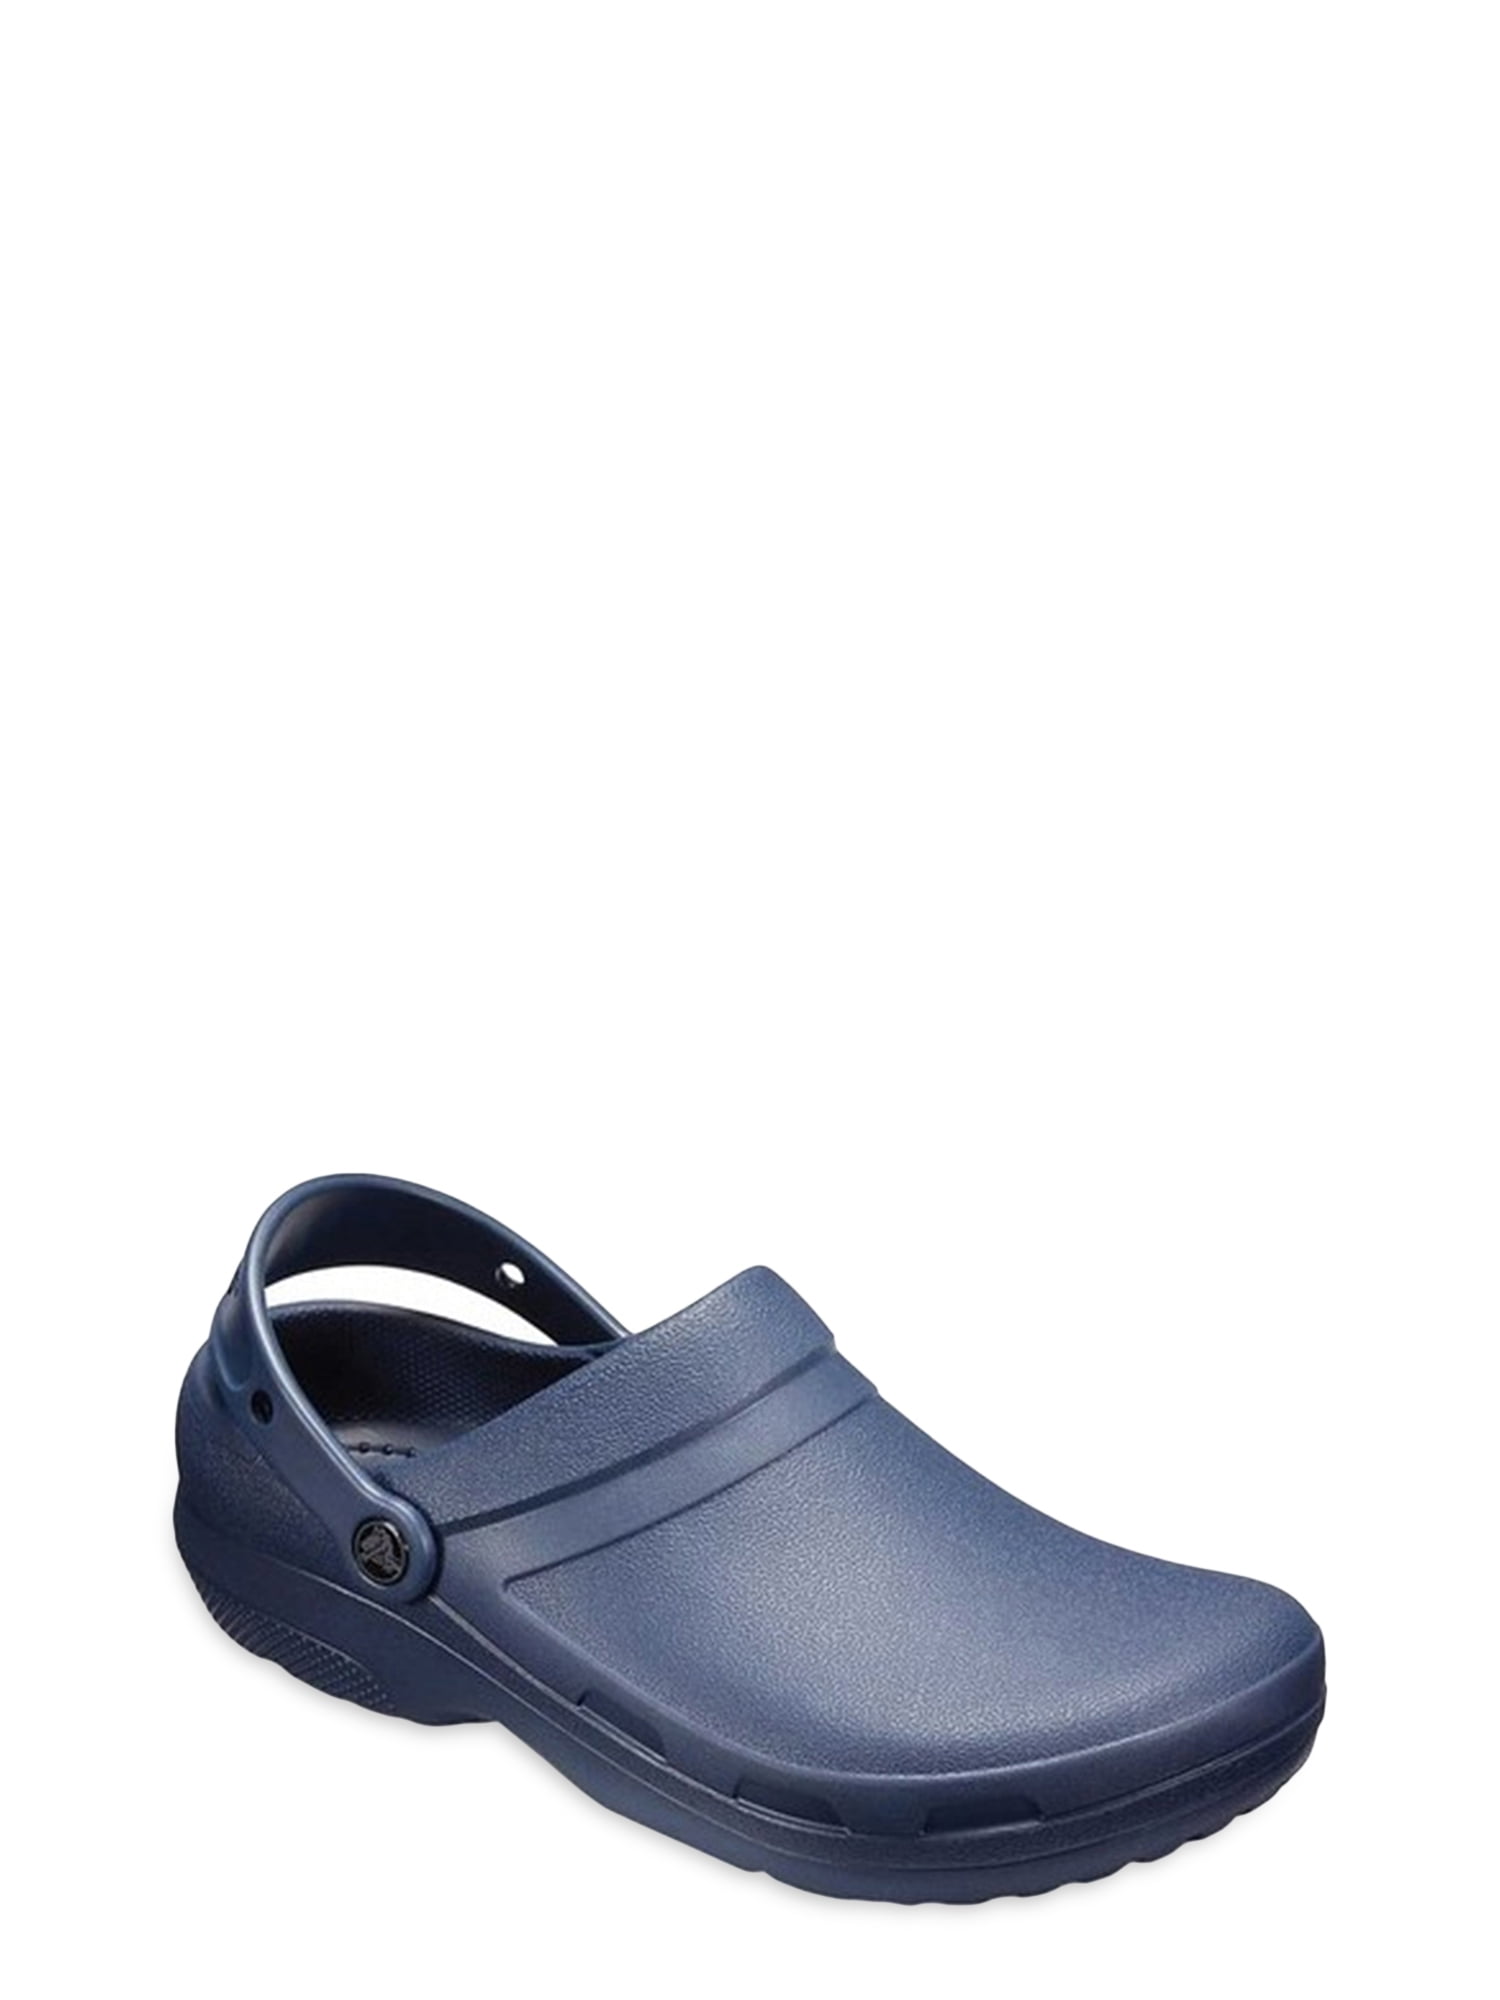 Crocs Unisex-Adult Men's and Women's Specialist II Work Clog (Navy or White, Various Sizes) $22.99 + Free S&H w/ Walmart+ or $35+